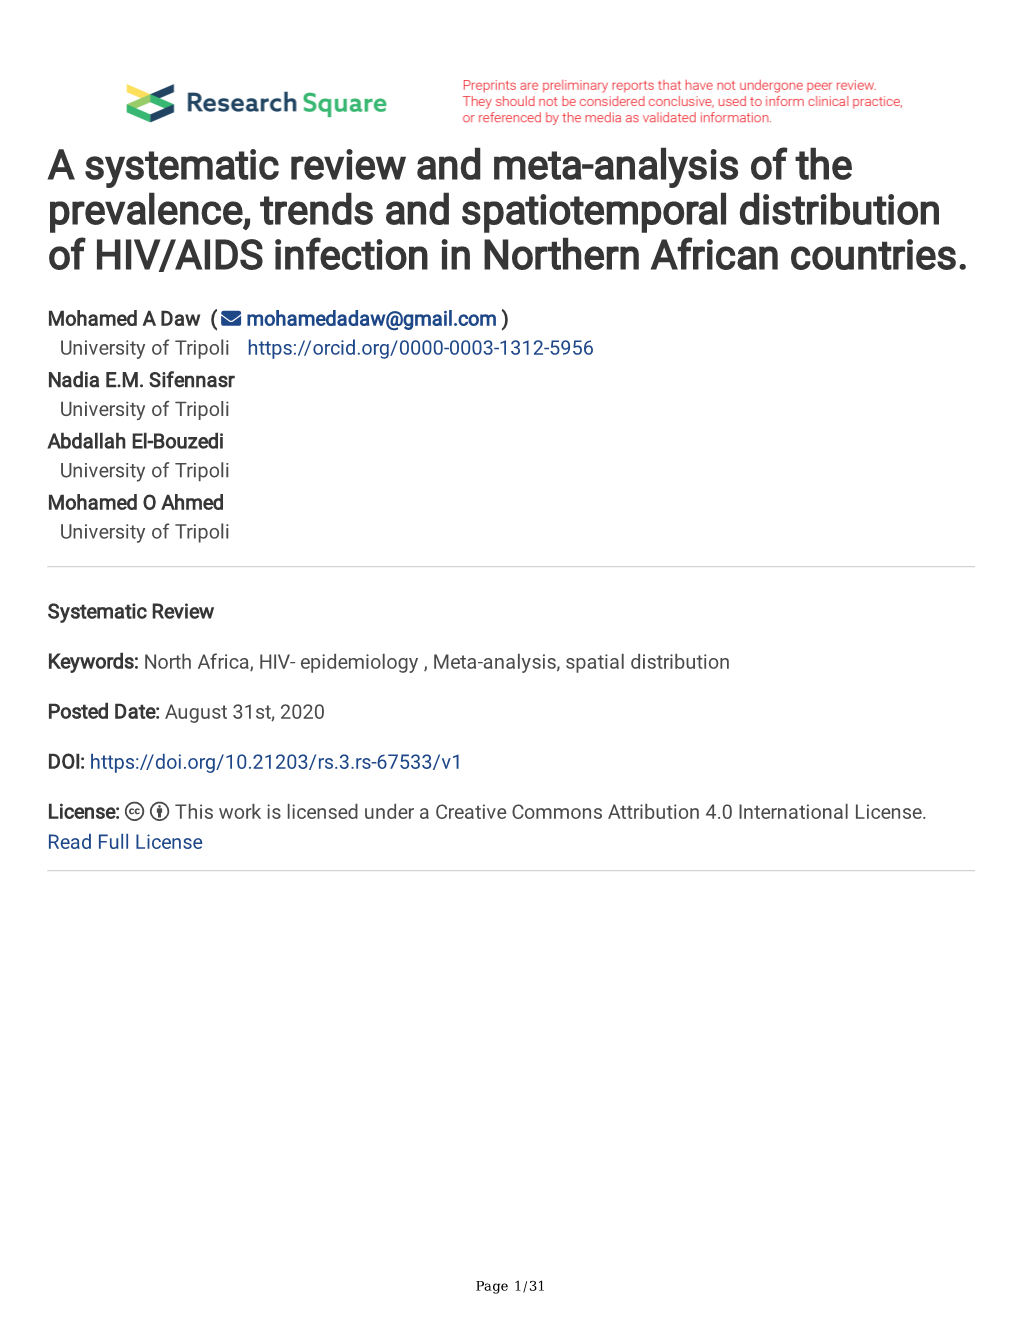 A Systematic Review and Meta-Analysis of the Prevalence, Trends and Spatiotemporal Distribution of HIV/AIDS Infection in Northern African Countries